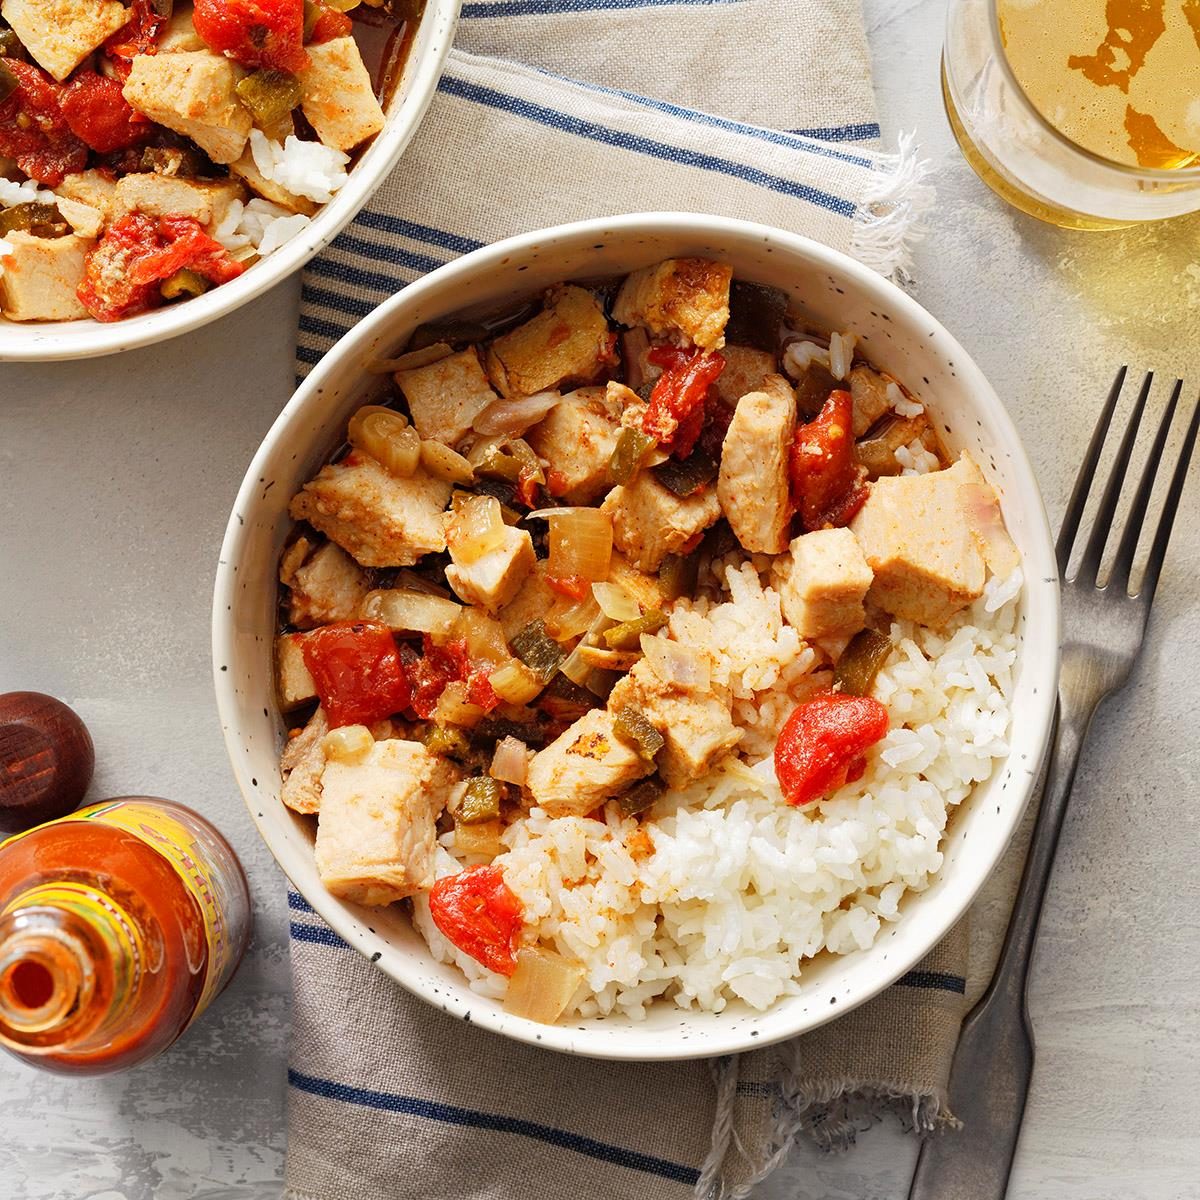 <p>Three hours in the slow cooker turns this spice-coated pork loin into a tender, juicy, succulent dinner with minimal effort. Serve over <a href="https://www.tasteofhome.com/article/how-to-make-rice/">perfectly cooked rice</a>.</p> <div class="listicle-page__buttons"> <div class="listicle-page__cta-button"><a href='https://www.tasteofhome.com/recipes/slow-cooker-arizona-poblano-pork/'>Go to Recipe</a></div> </div>